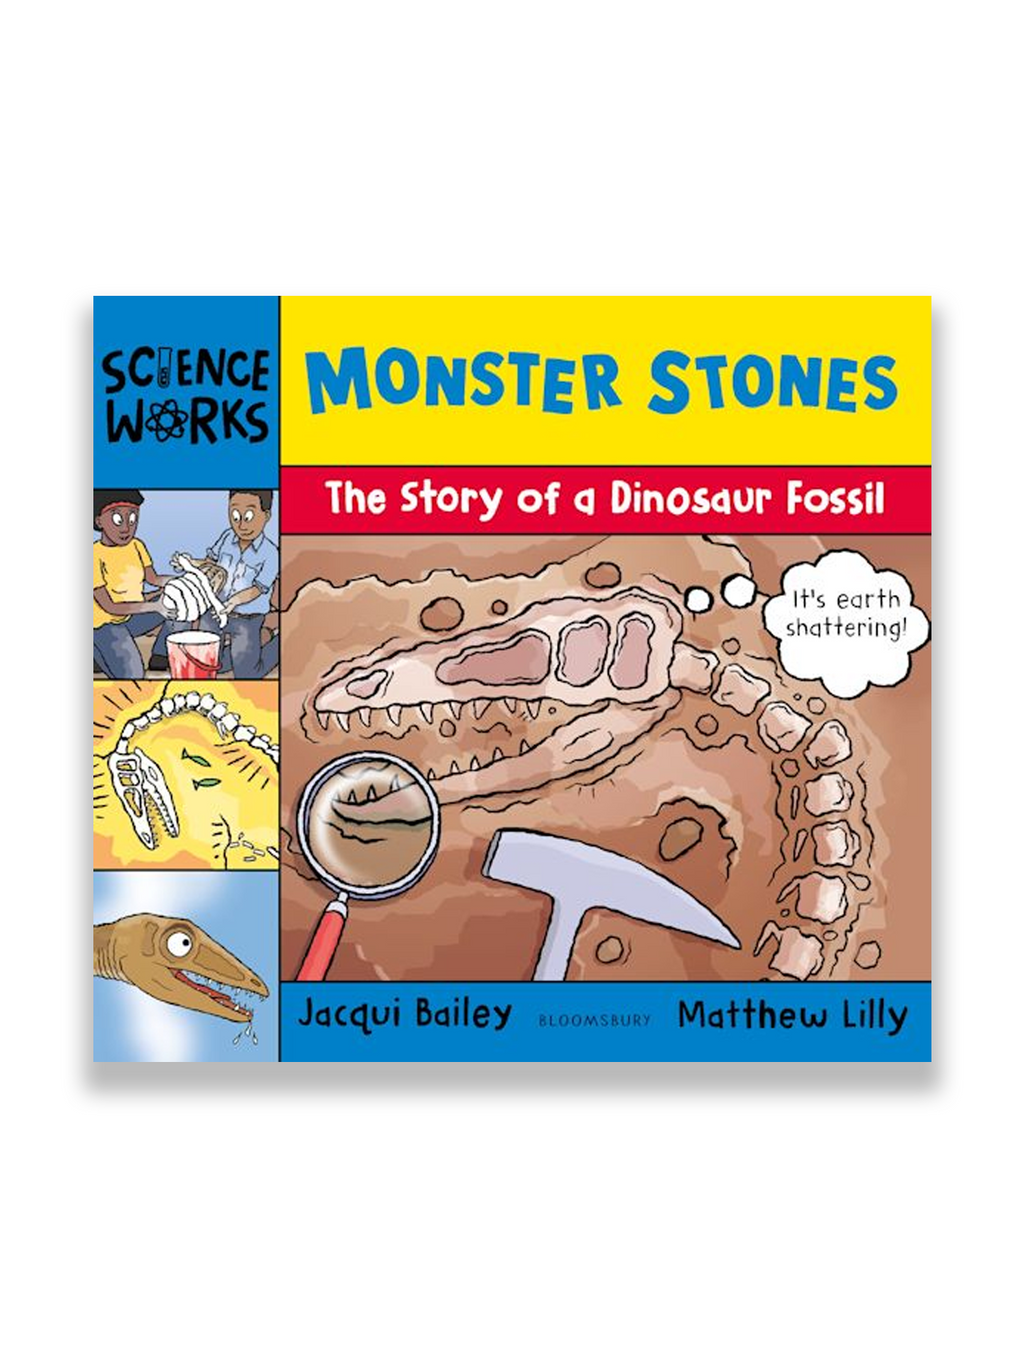 Monster Stones: The Story of a Dinosaur Fossil (Science Works)